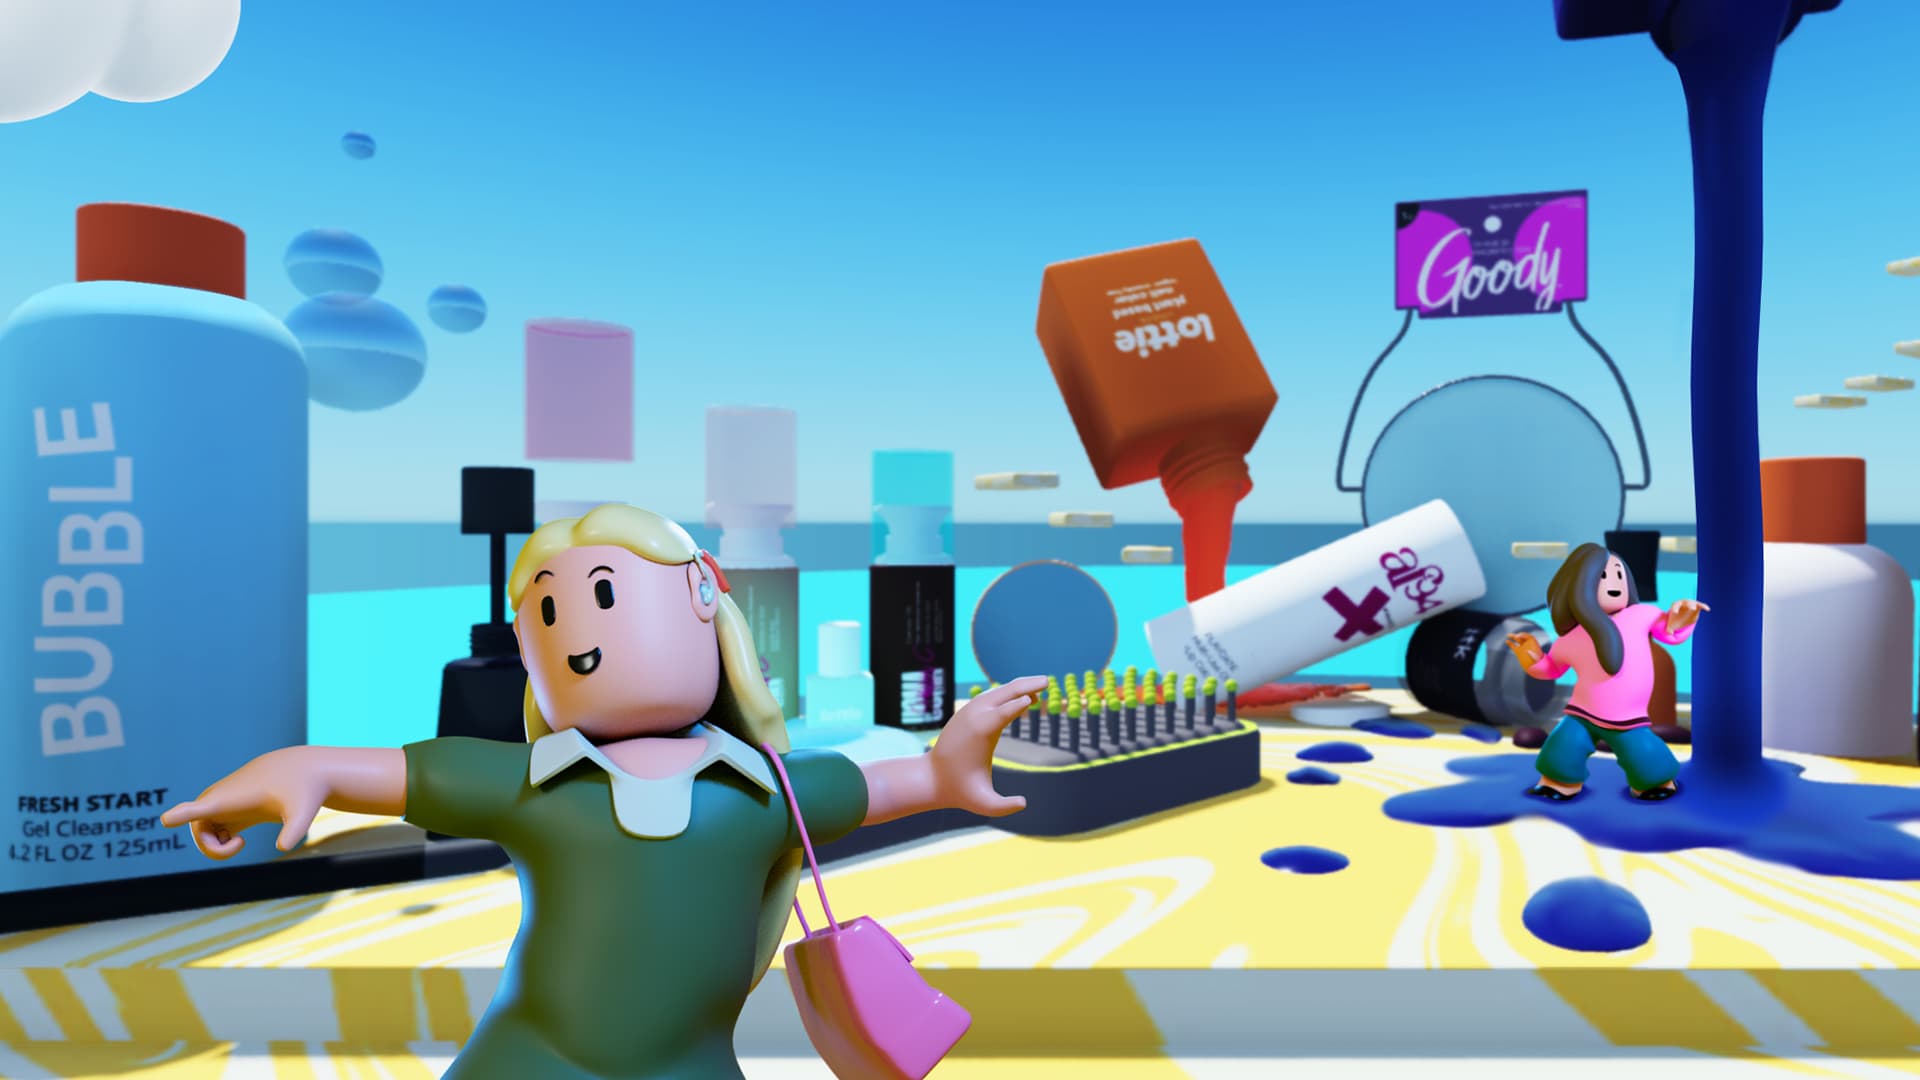 This Roblox game is teaching kids about the markets - Financial Pipeline